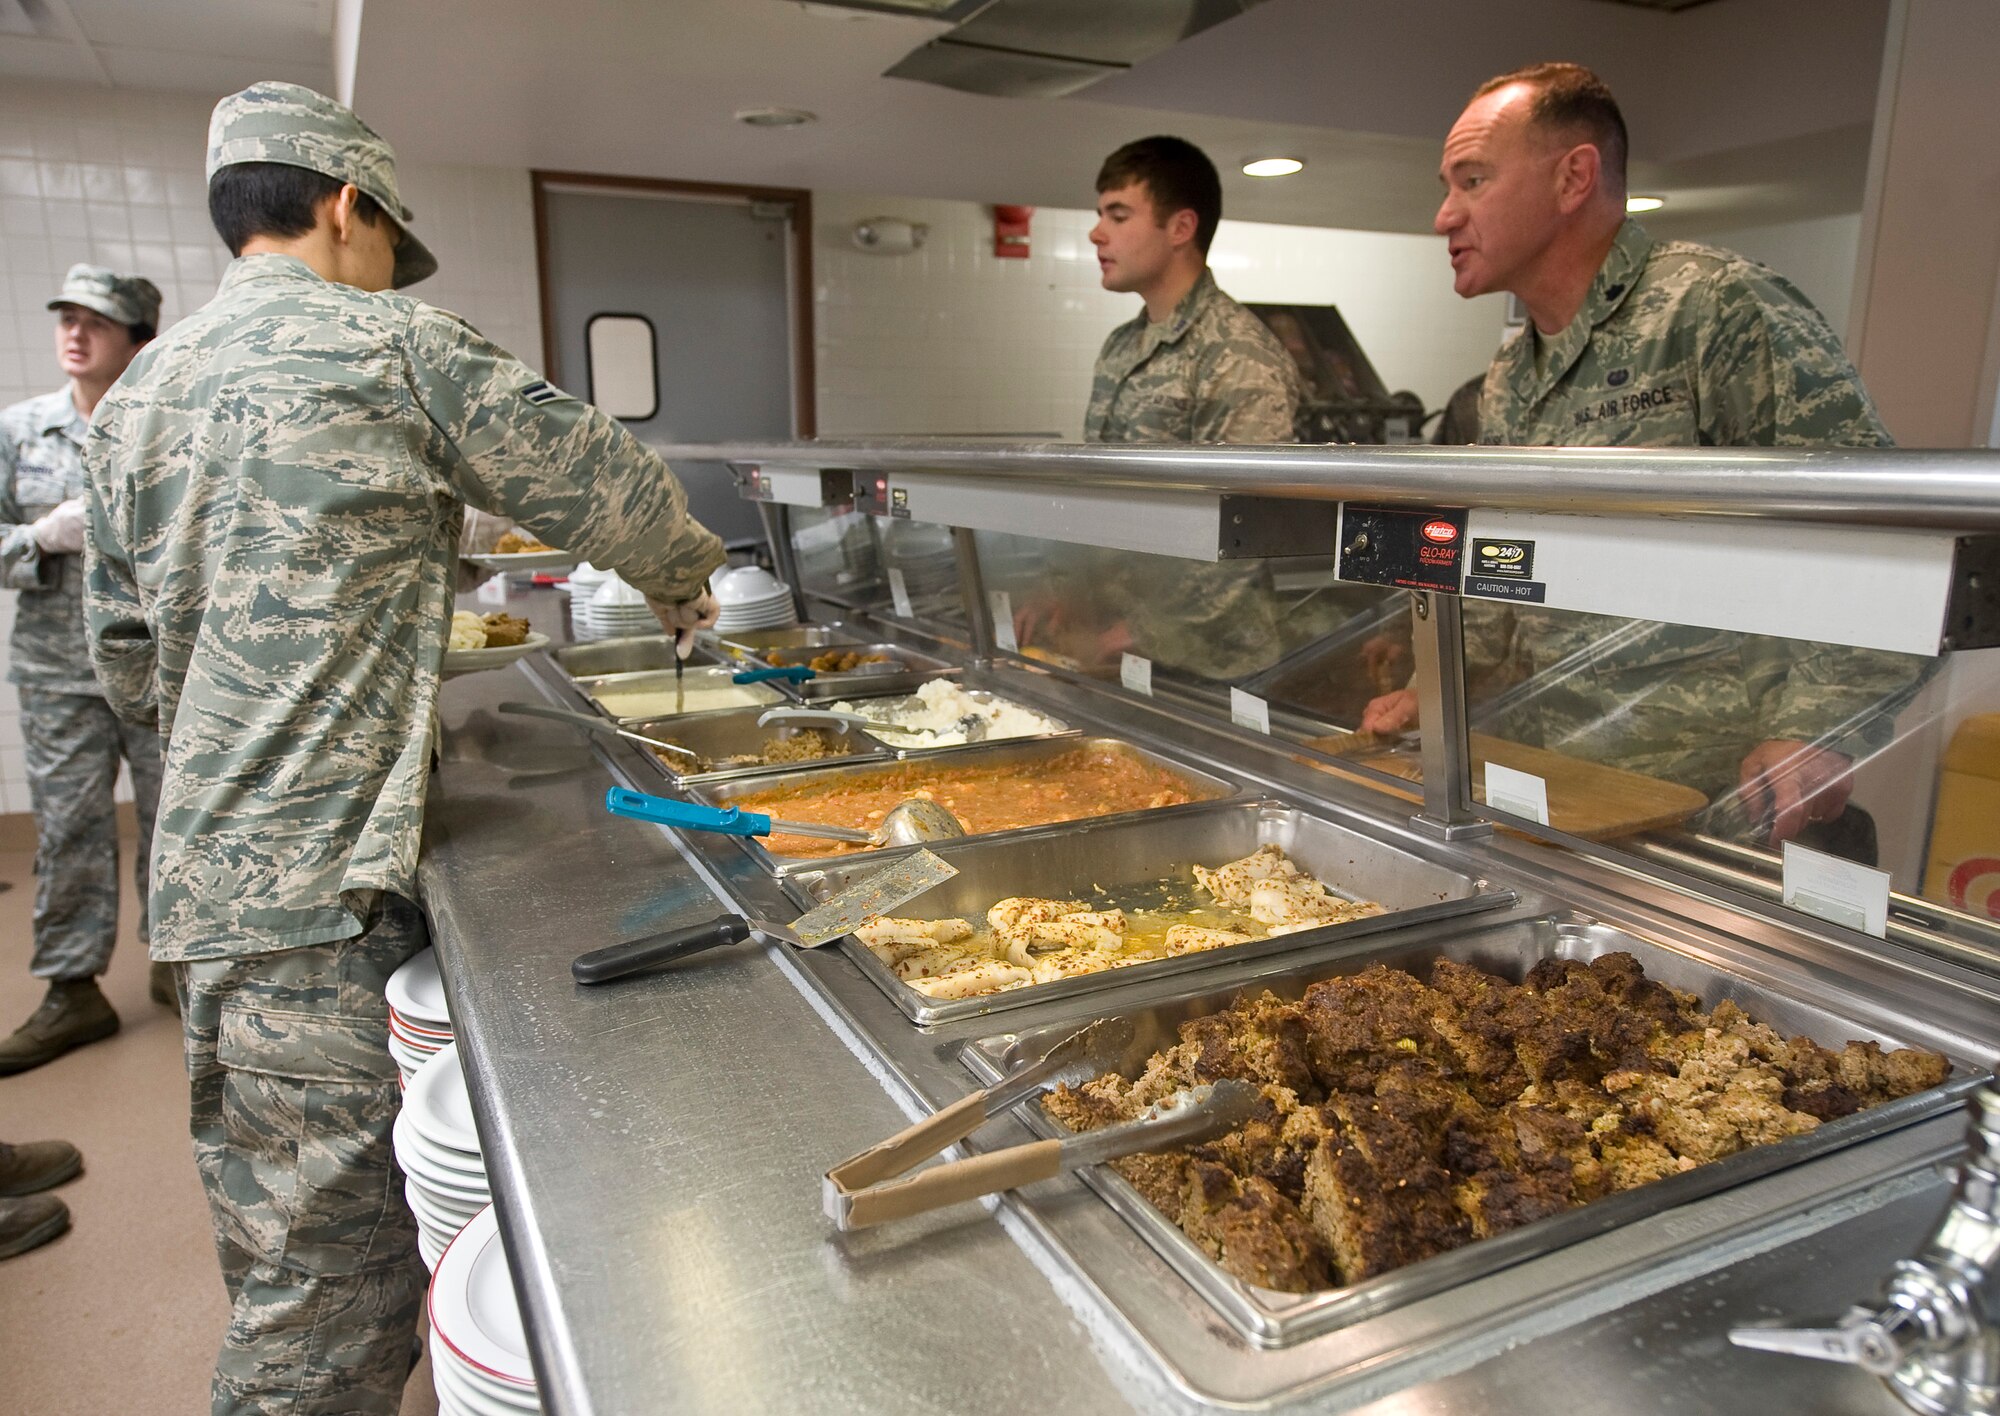 Airman 1st Class Christian Noe, 2nd Force support Squadron, serves lunch in the Red River Dining Facility on Barksdale Air Force Base, La., June 6. The dining facility offers a wide variety of food, including several healthy options for patrons to choose from. (U.S. Air Force photo/Staff Sgt. Chad Warren)(RELEASED)